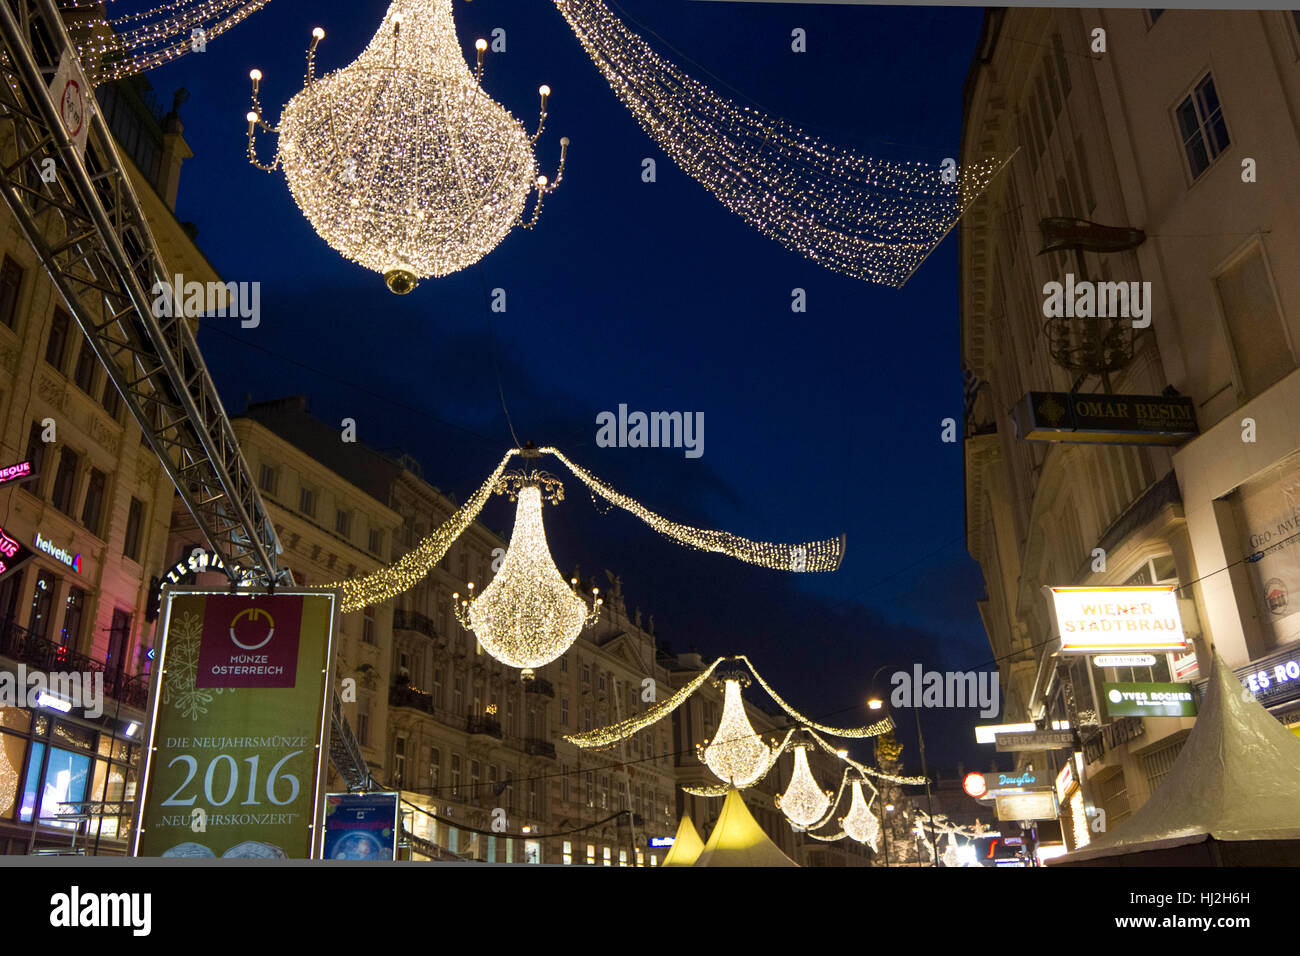 VIENNA, AUSTRIA - JANUARY 1 2016: Graben street in Vienna at night time during the holidays for the New Year Eve 2016 Stock Photo